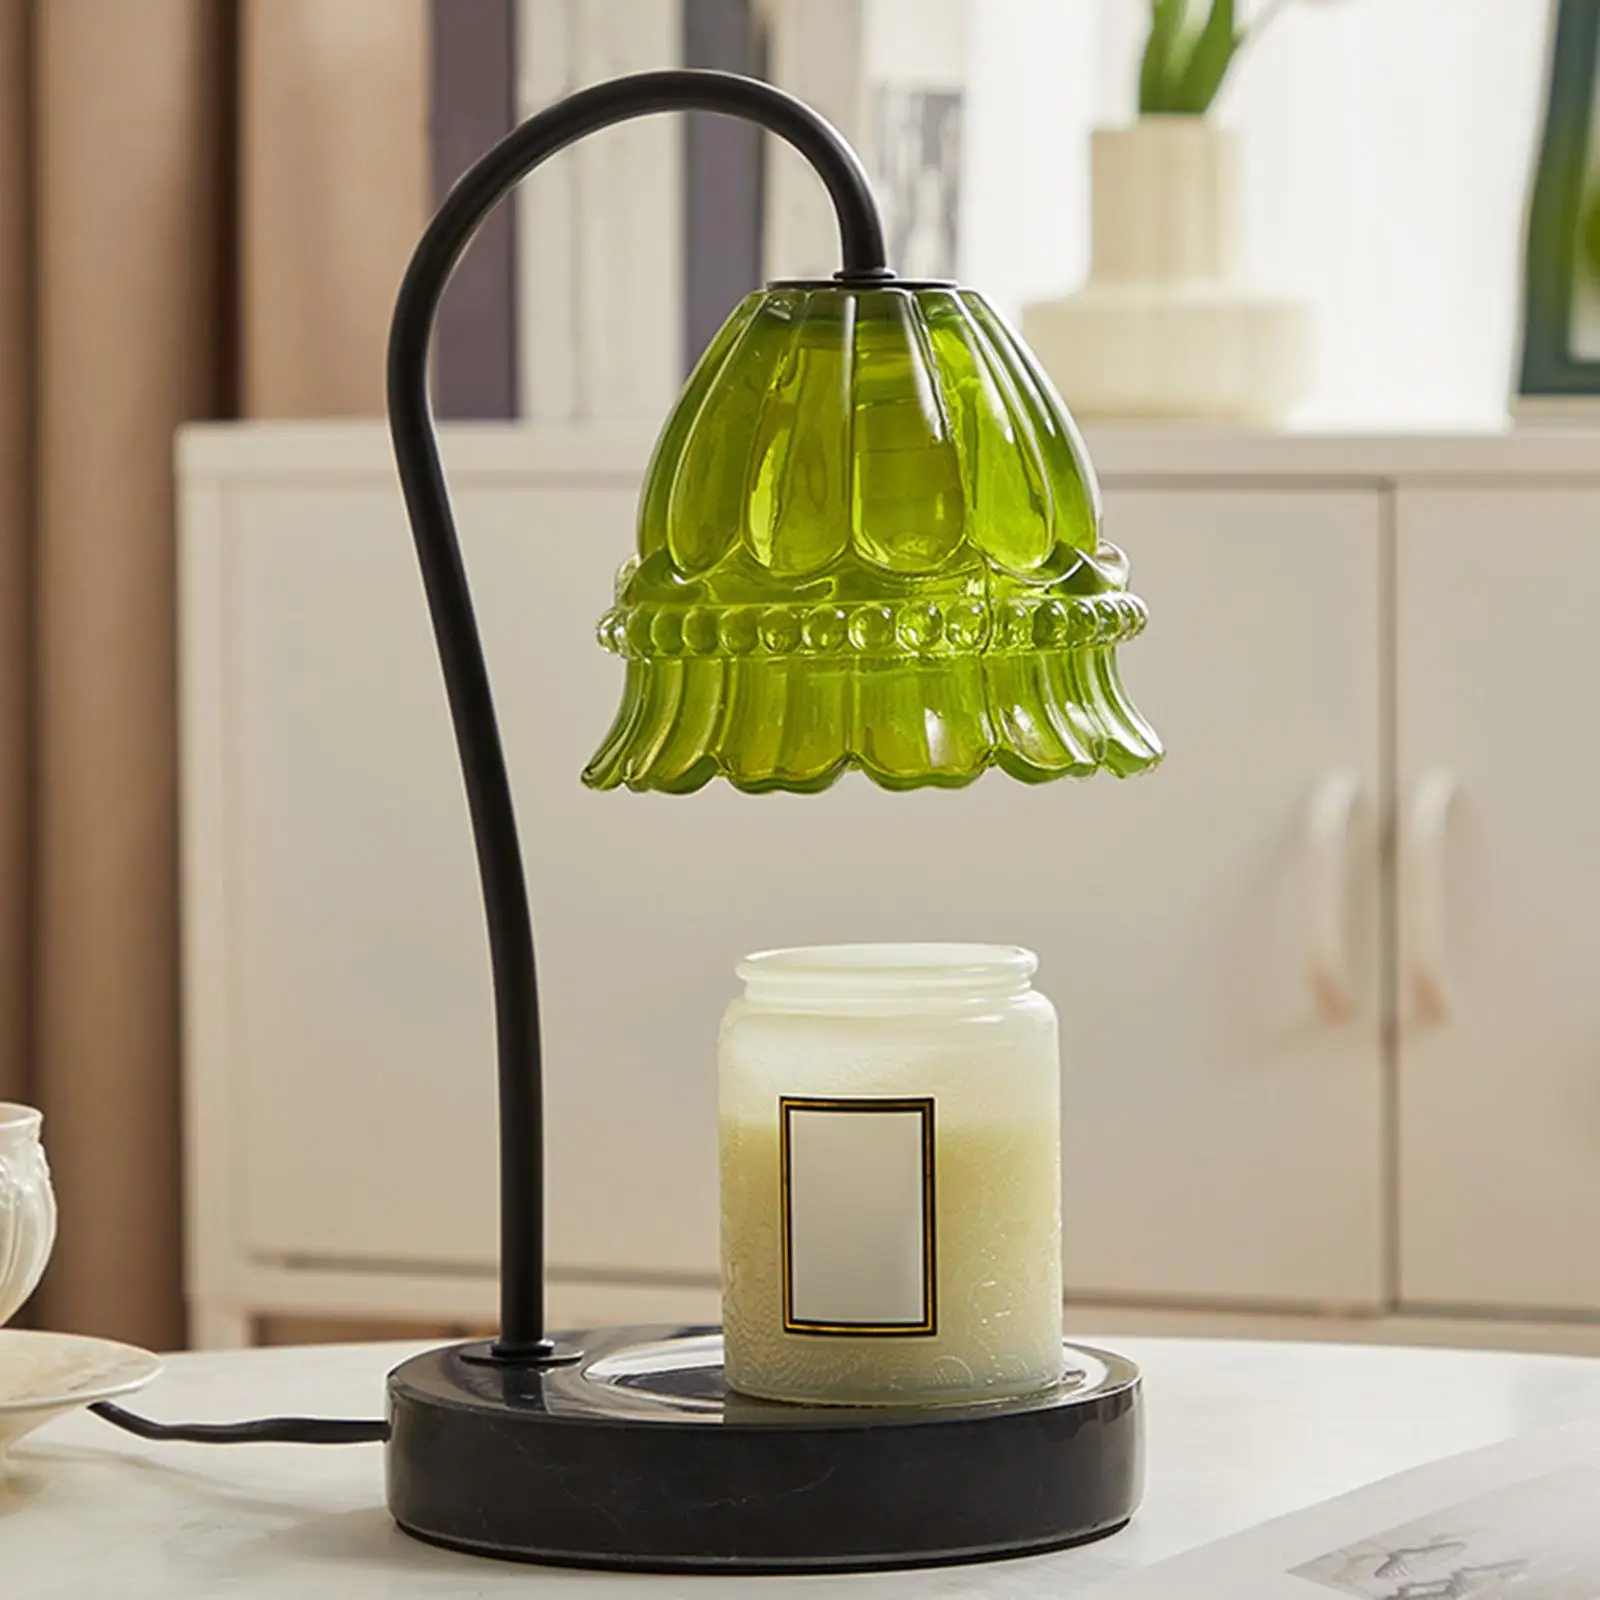 Candle Warmer Lamp Candle Lamp Candle Wax Melting Light for Bathroom